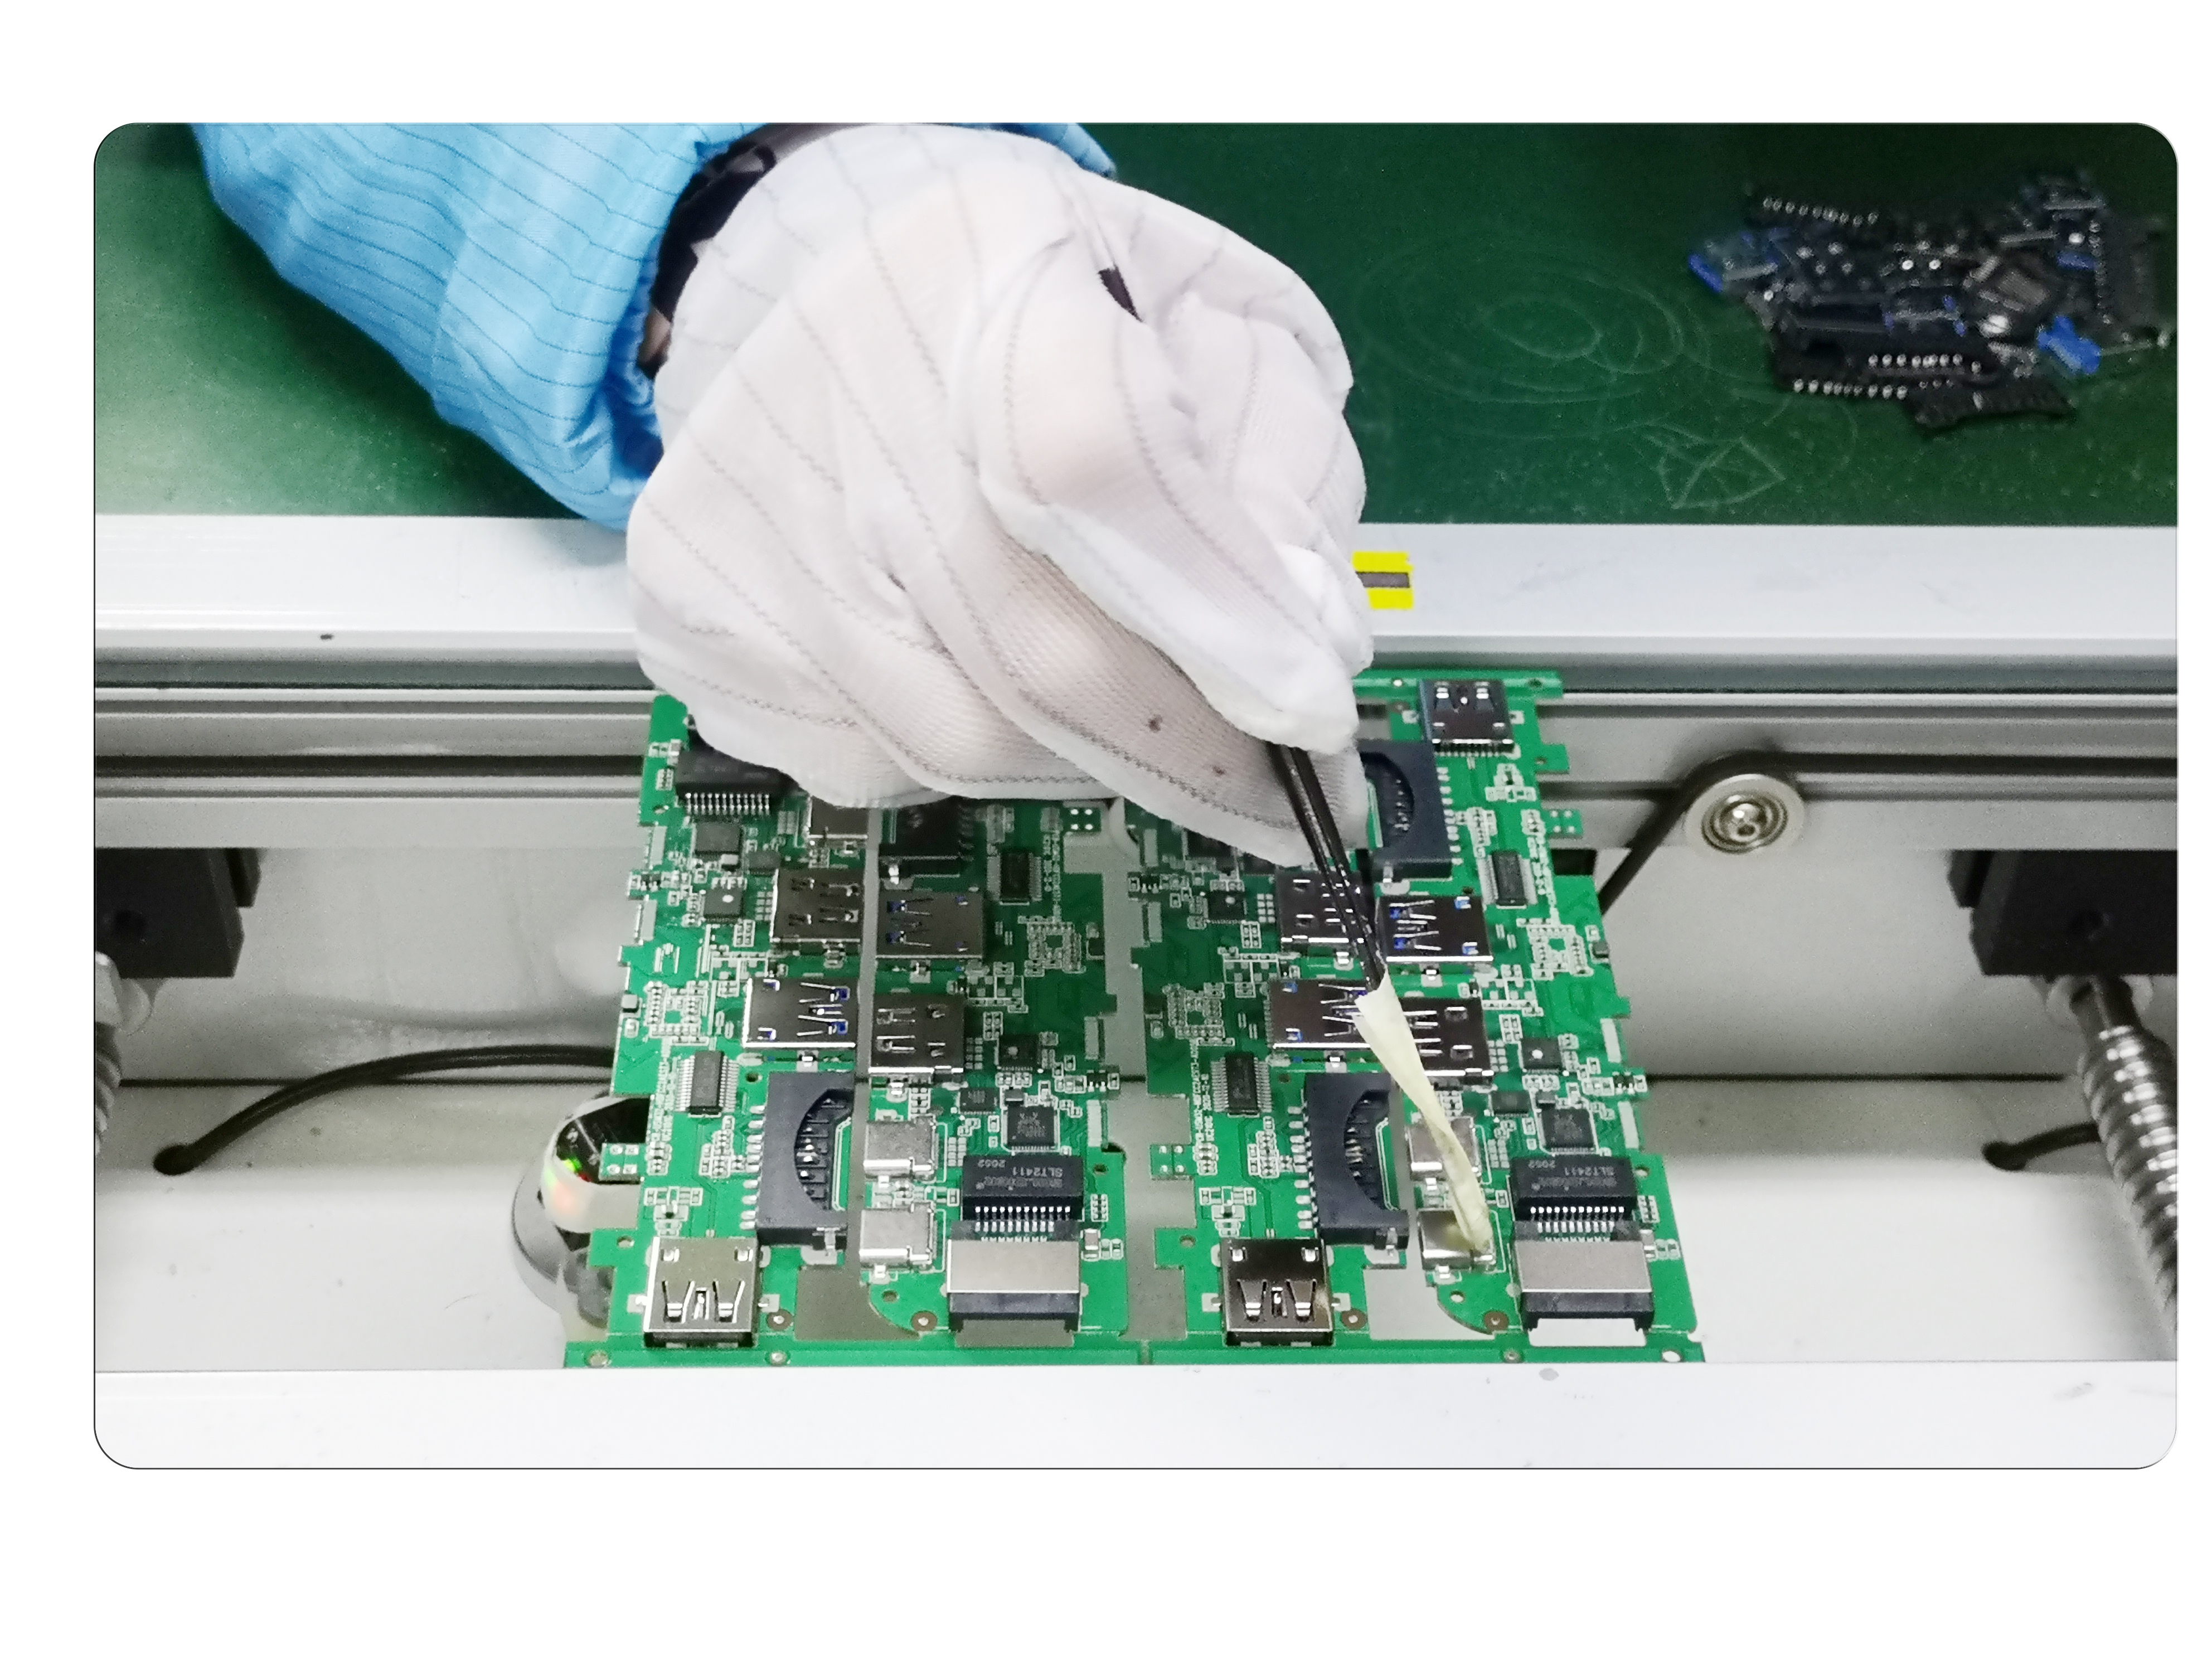 PCB assembly adopts BGA technology to reduce interference and crosstalk between pins